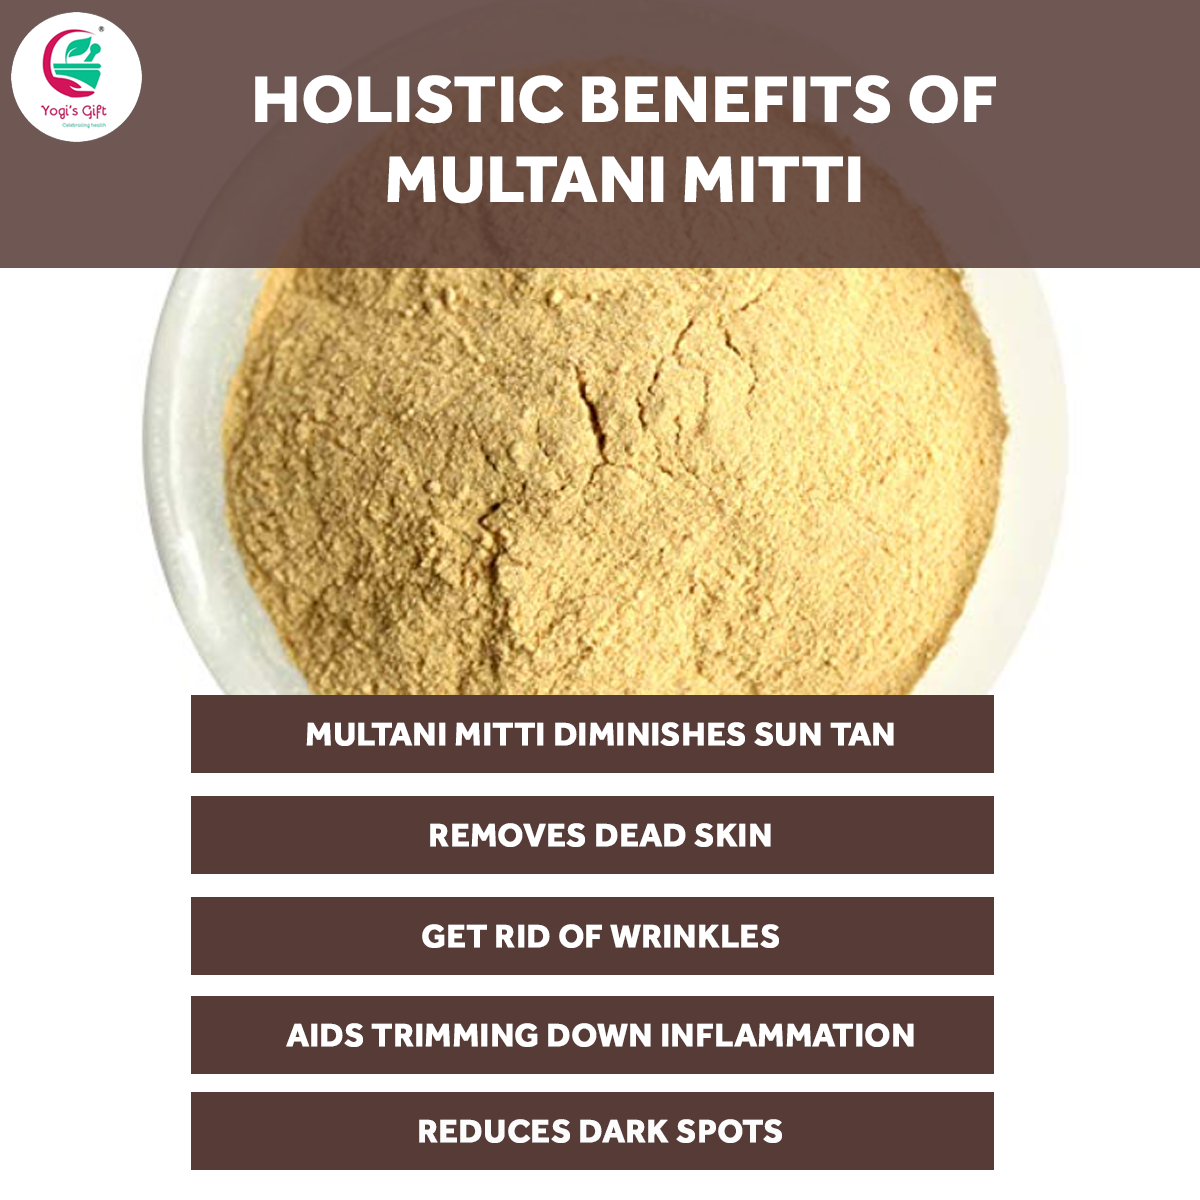 Multani Mitti Powder | Fullers Earth Clay | 100% Natural Indian Clay | Skin Tightening Face Pack, Detox Bath & Soap Making | 10 oz | By Yogi's Gift®